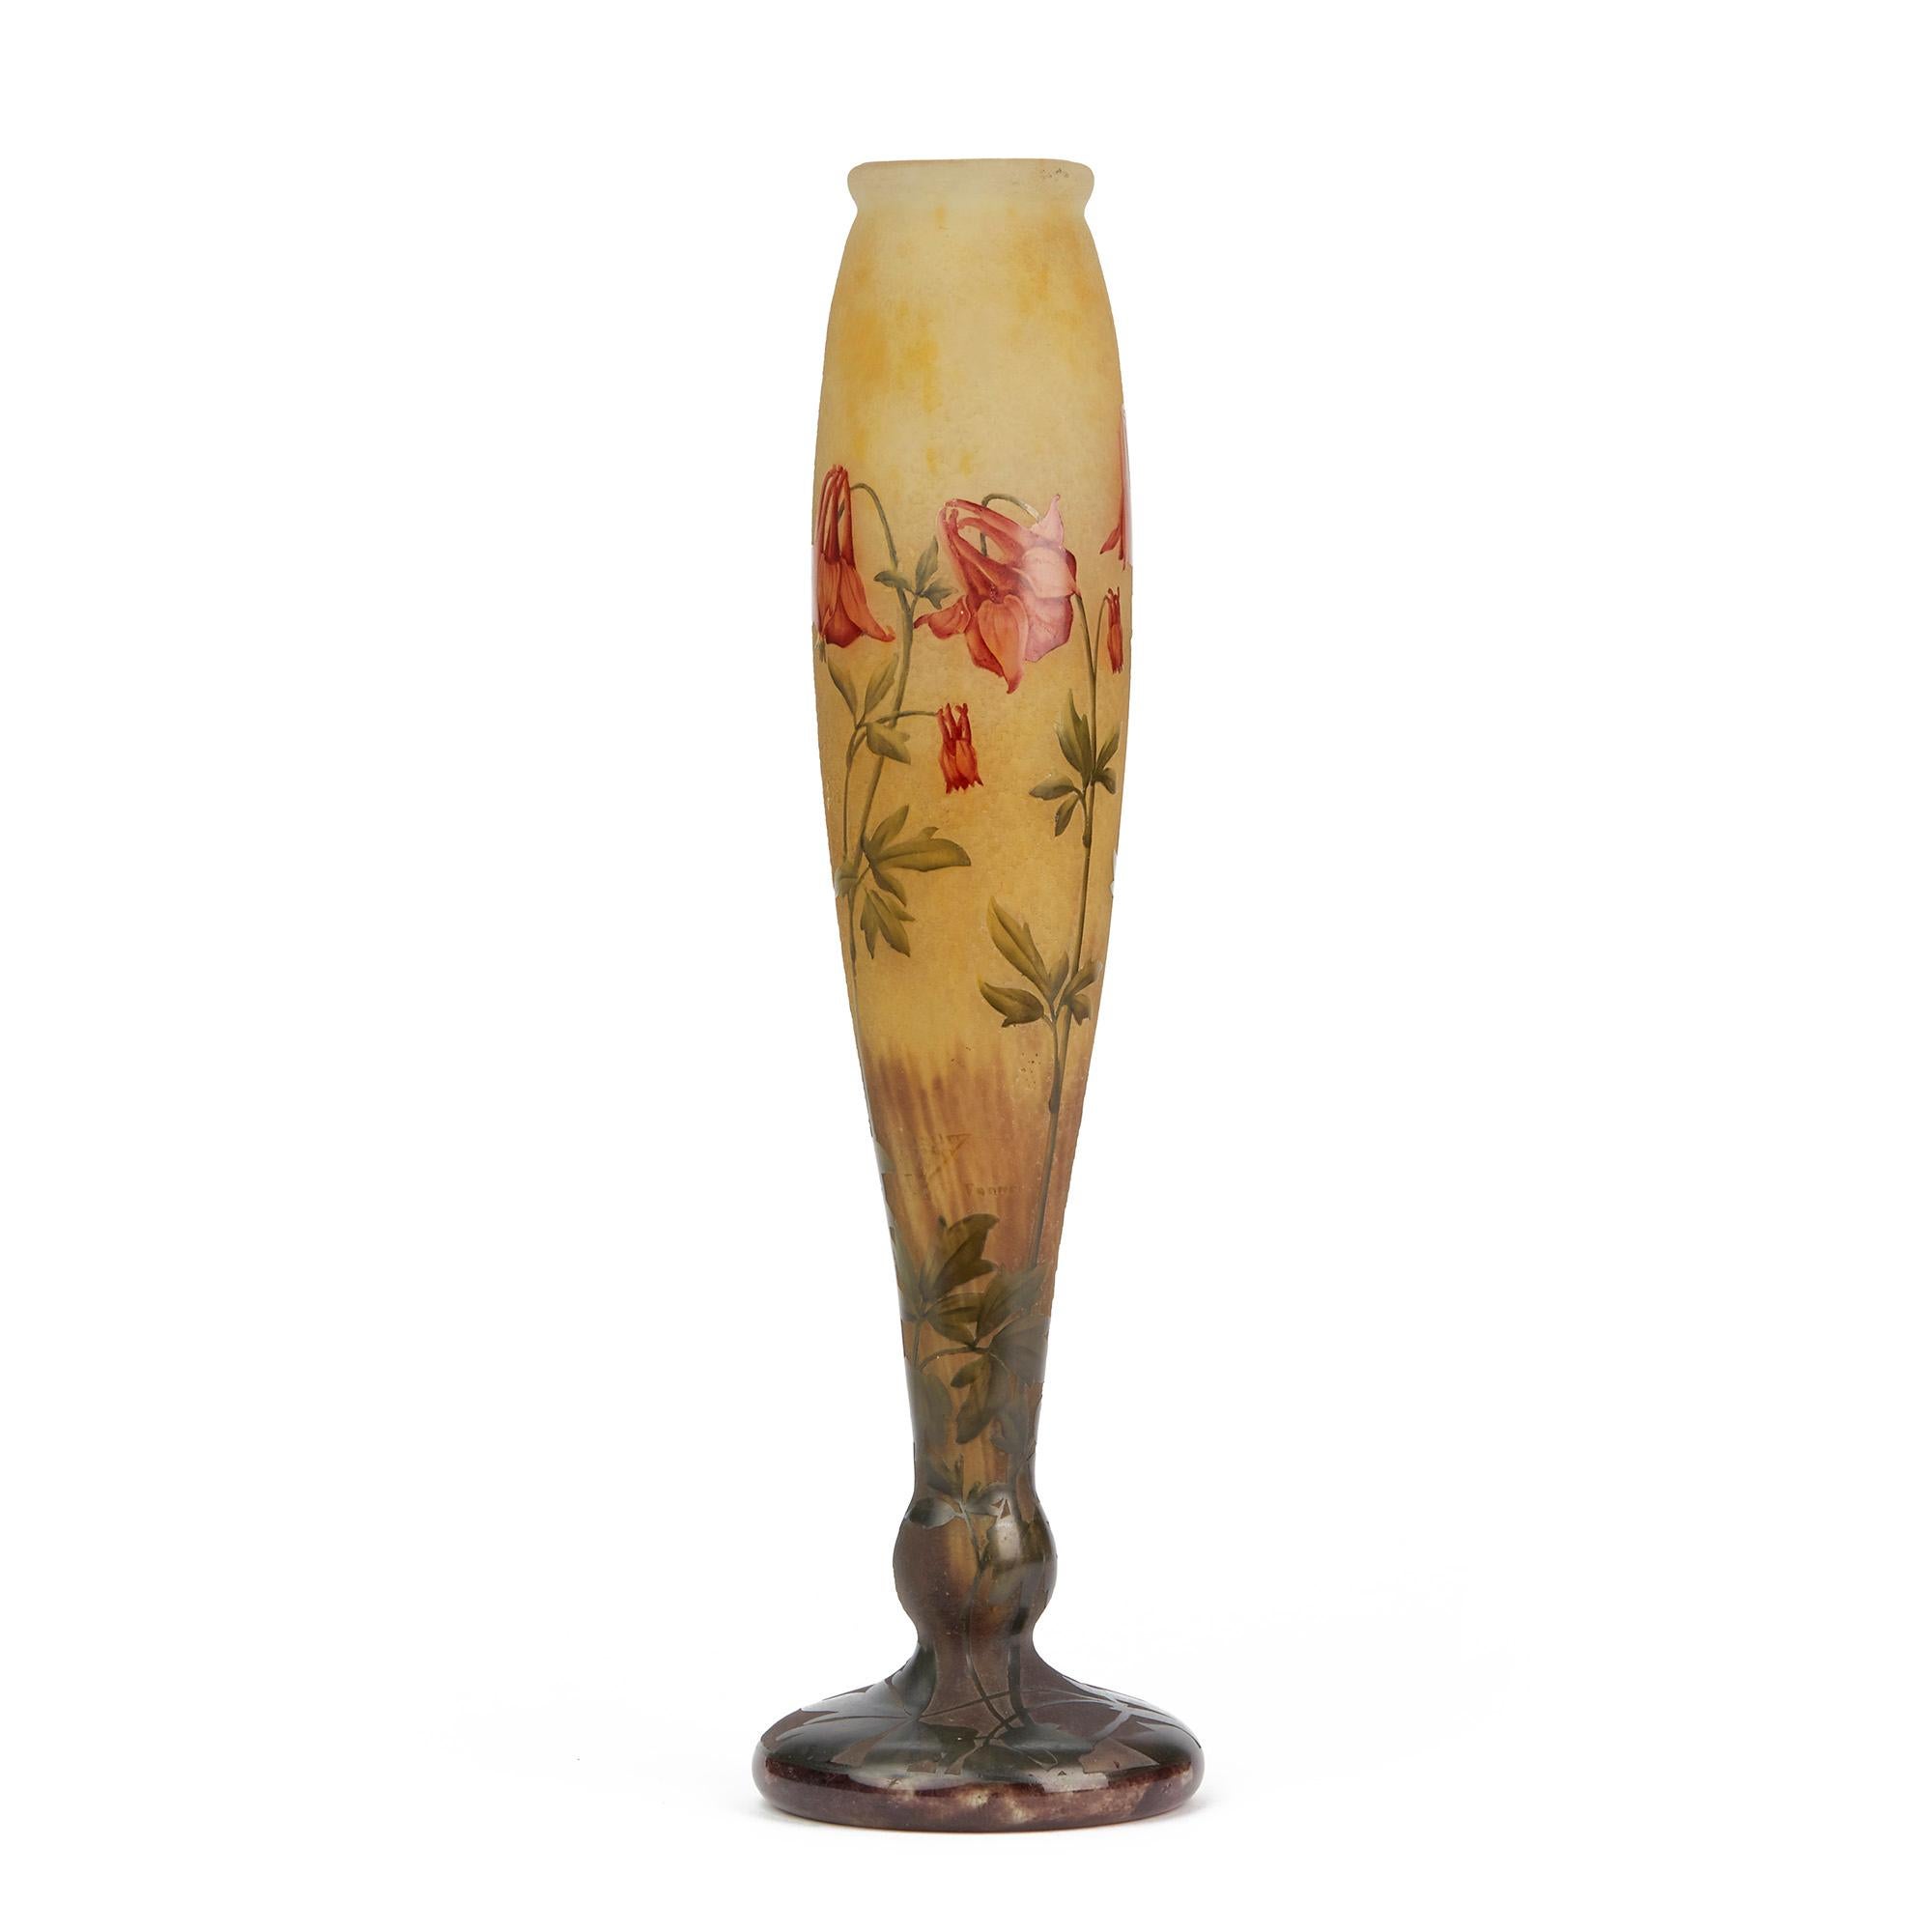 An exceptional French Art Nouveau Daum Frères Columbines cameo glass vase wheel cut with raised designs in colored enamels on an etched ground Dating from circa 1910. The tall slender bodied vase stands on a wide rounded foot cut with leaves and is